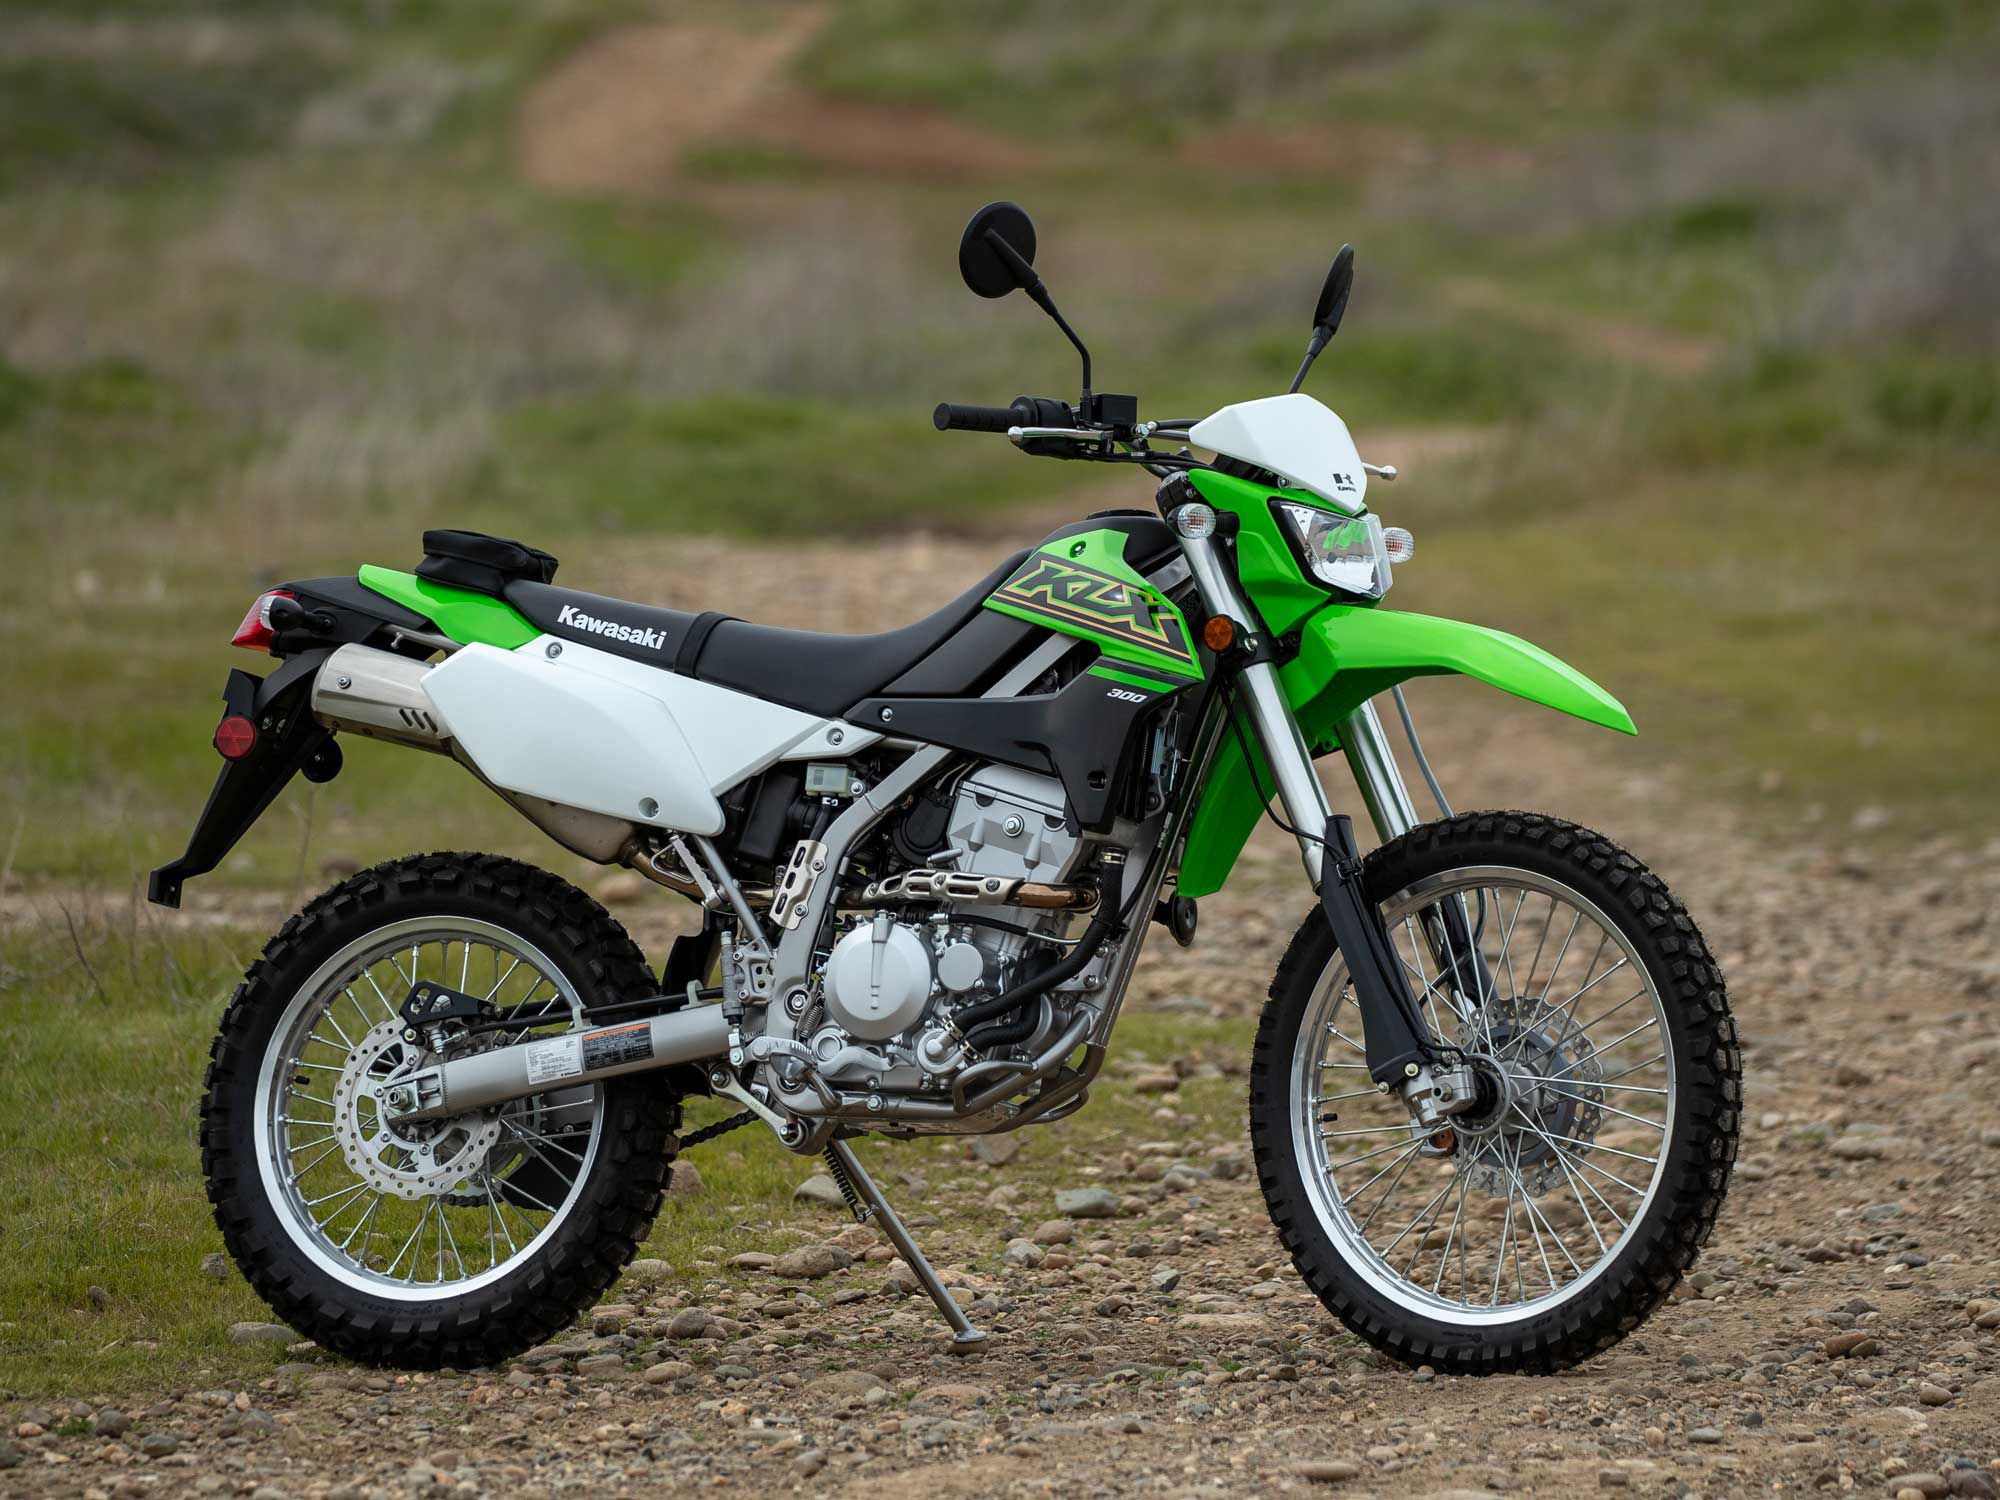 Where will the KLX300 take you?